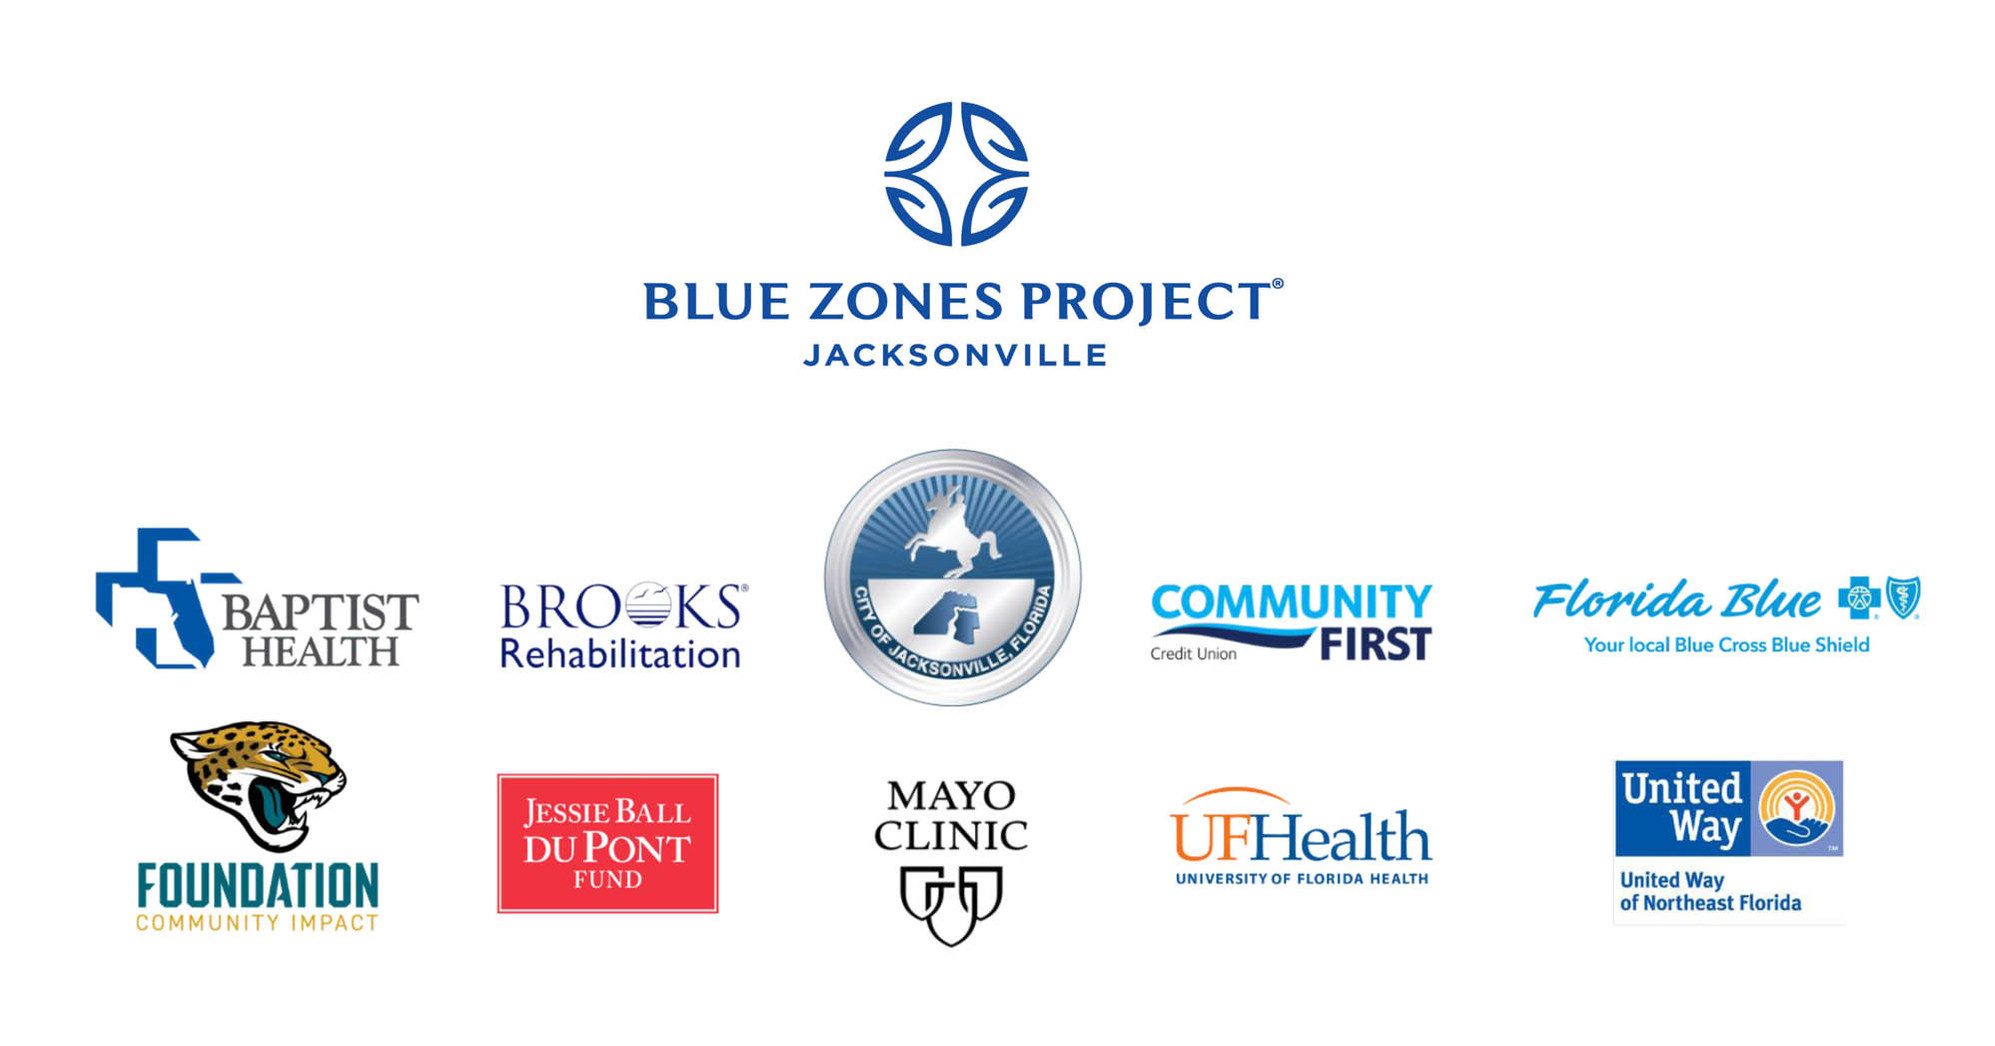   
																Blue Zones Project, Jacksonville Executive Director Announced 
															 